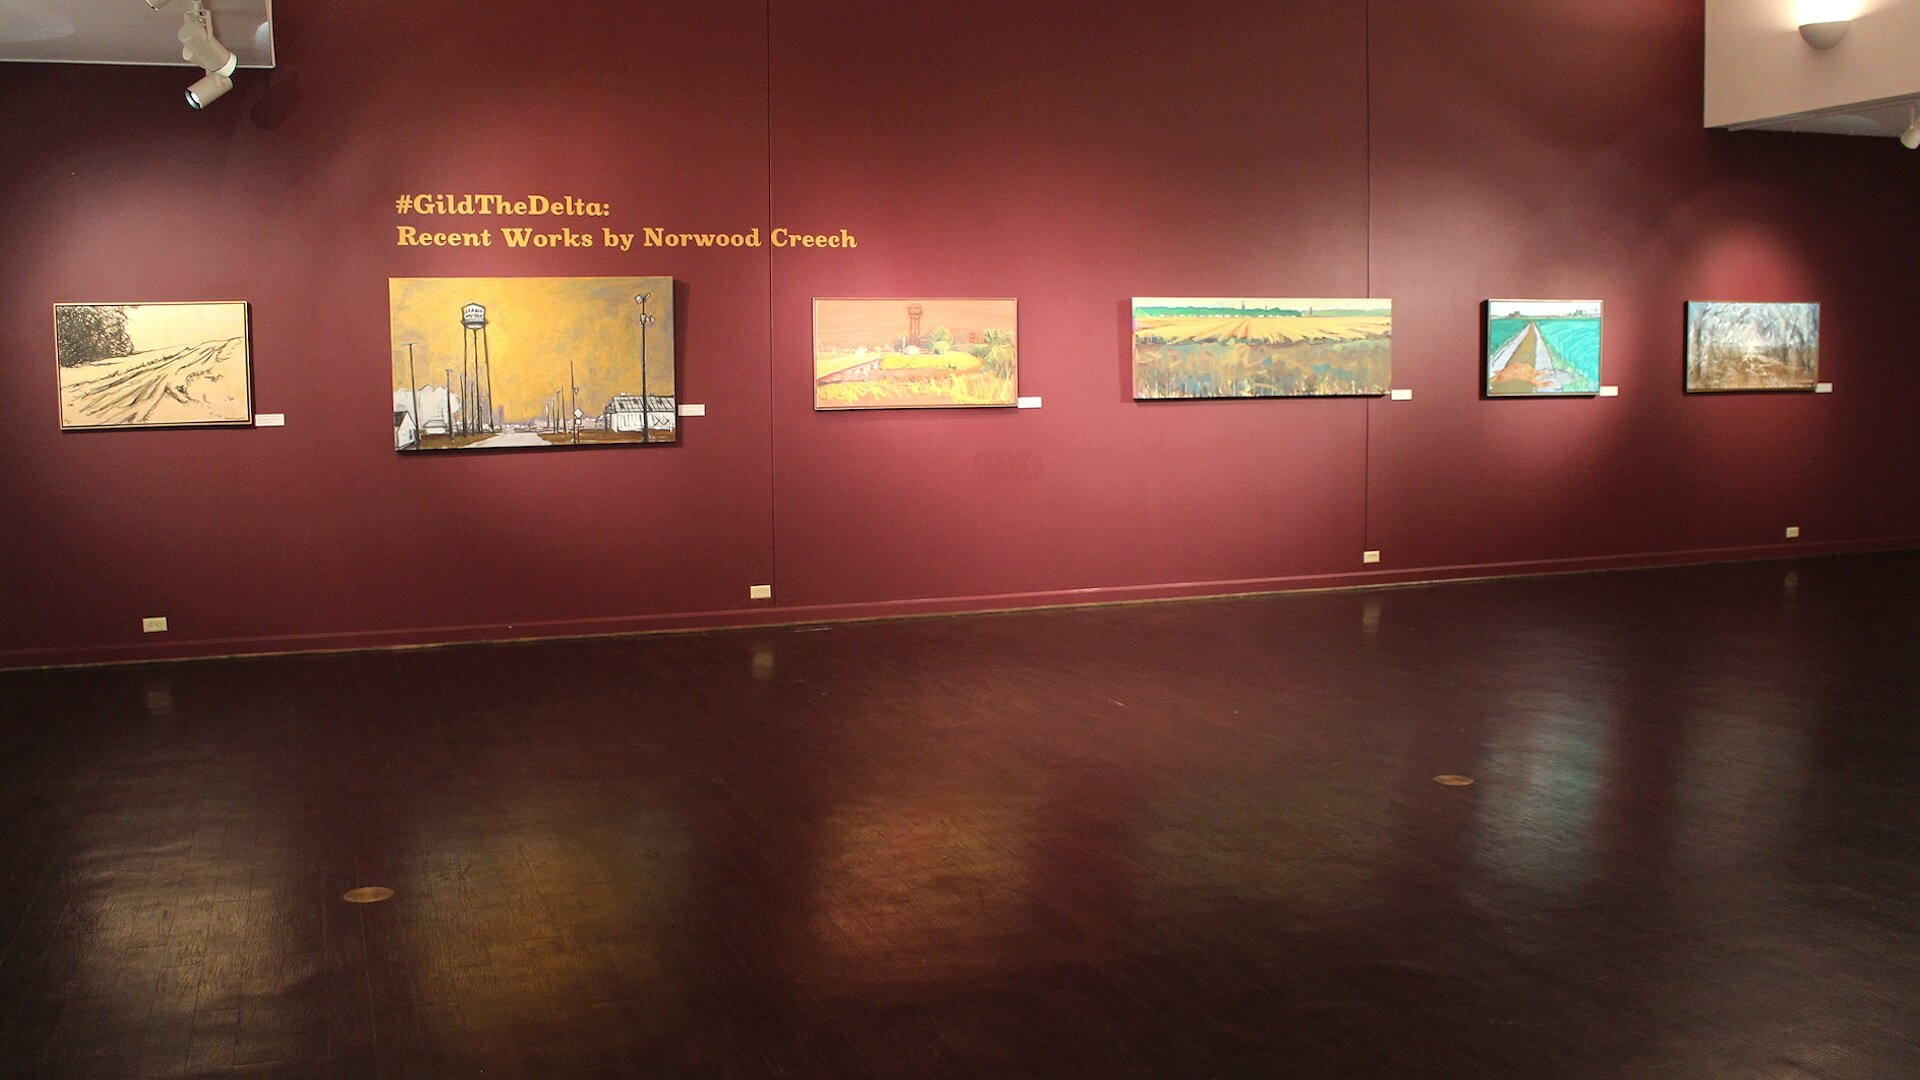 #GildtheDelta: Recent Works by Norwood Creech